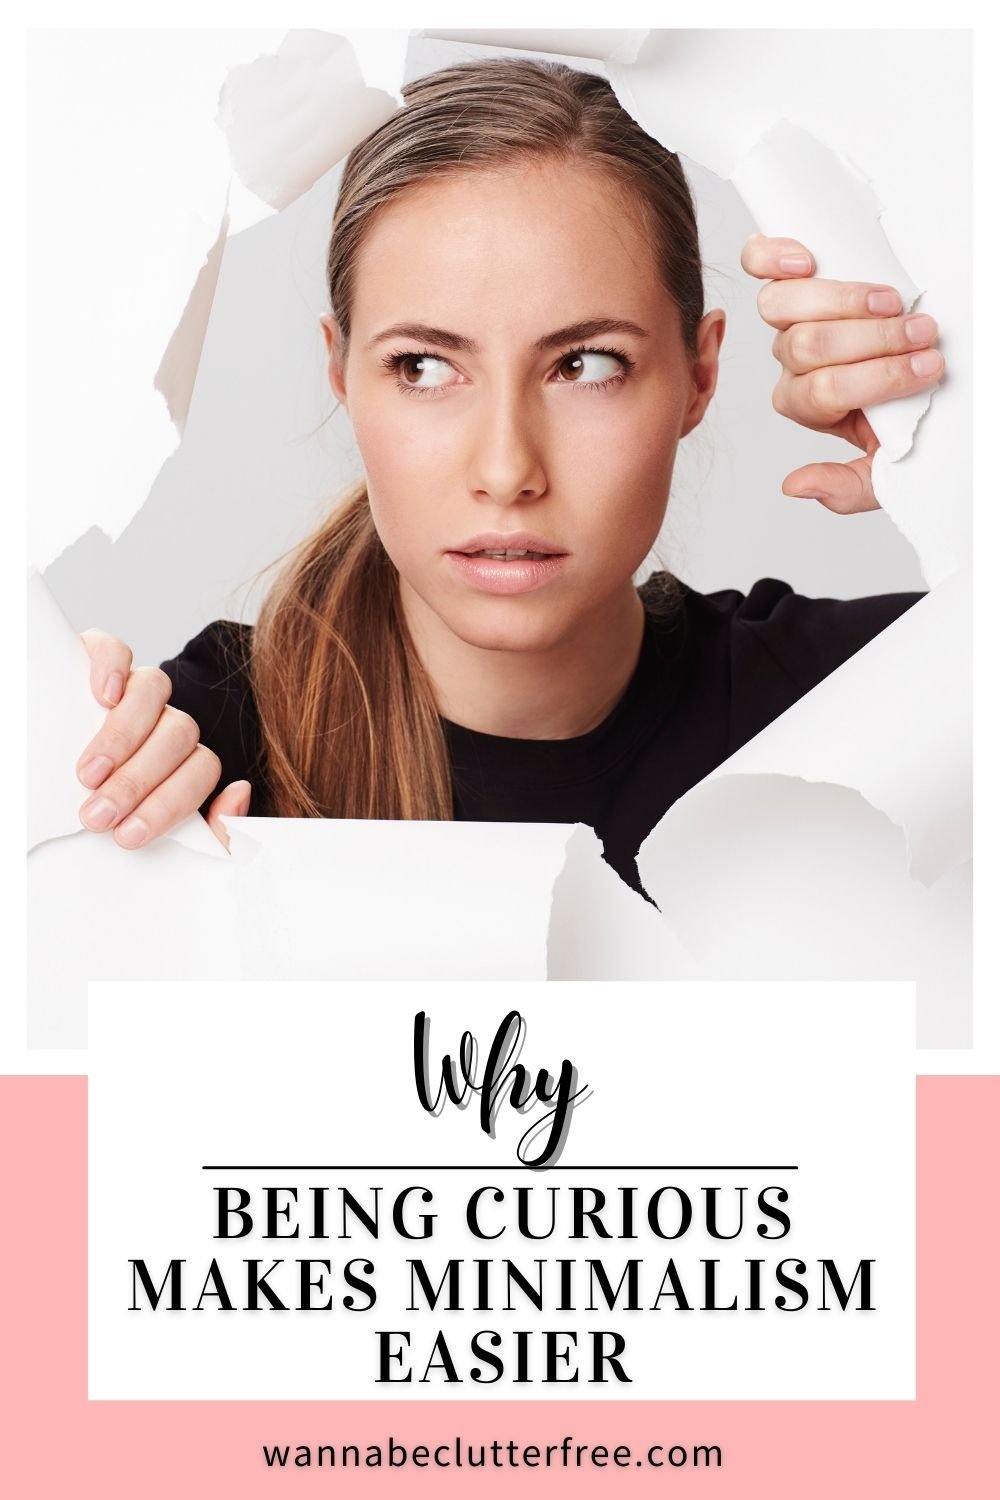 Why being curious makes minimalism easier